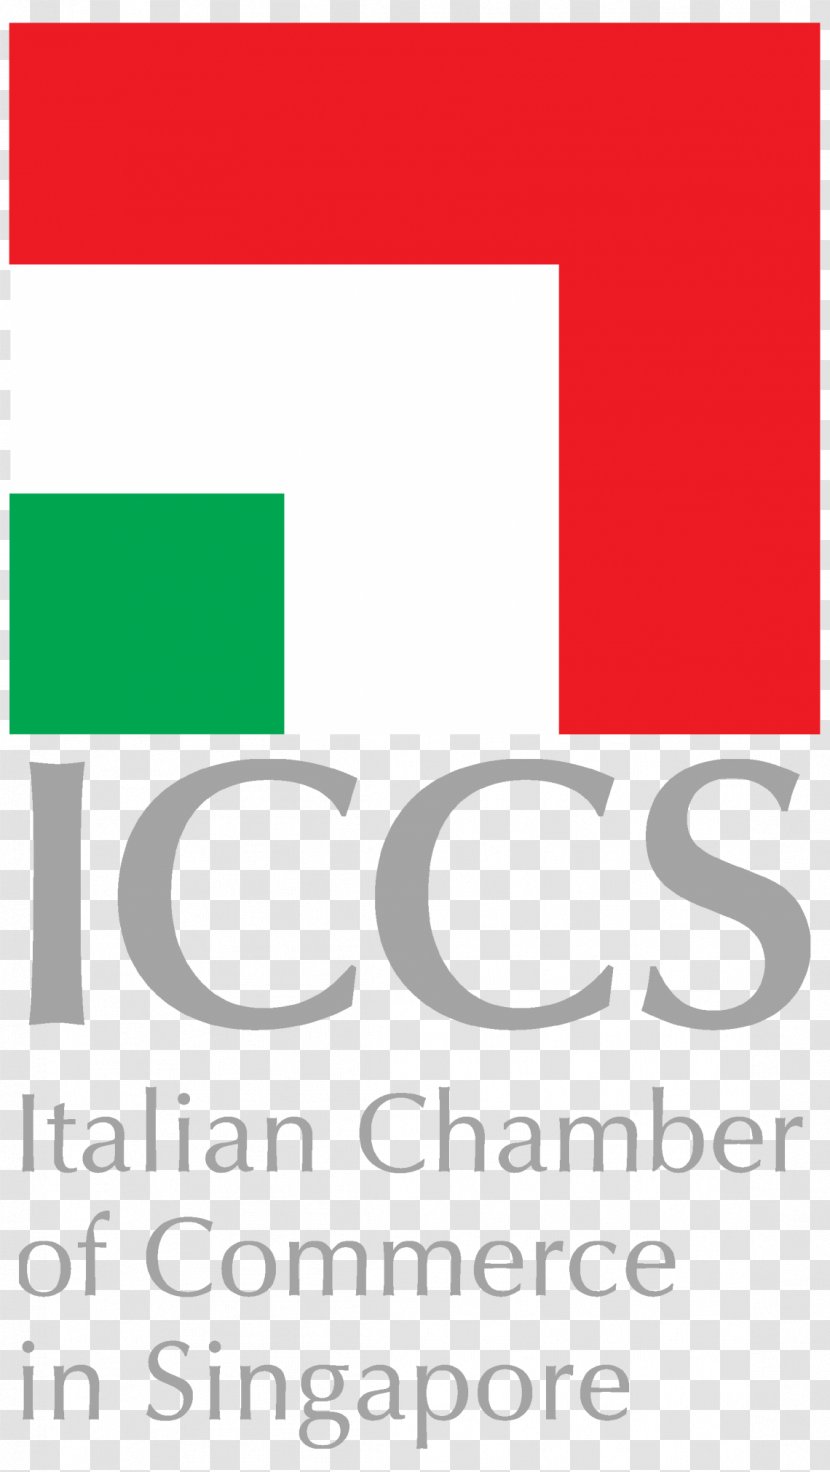 Italian Chamber Of Commerce In Singapore (Singapore) Logo Study At Raffles Product - Brand - Government Calendar 2018 Malaysia Transparent PNG